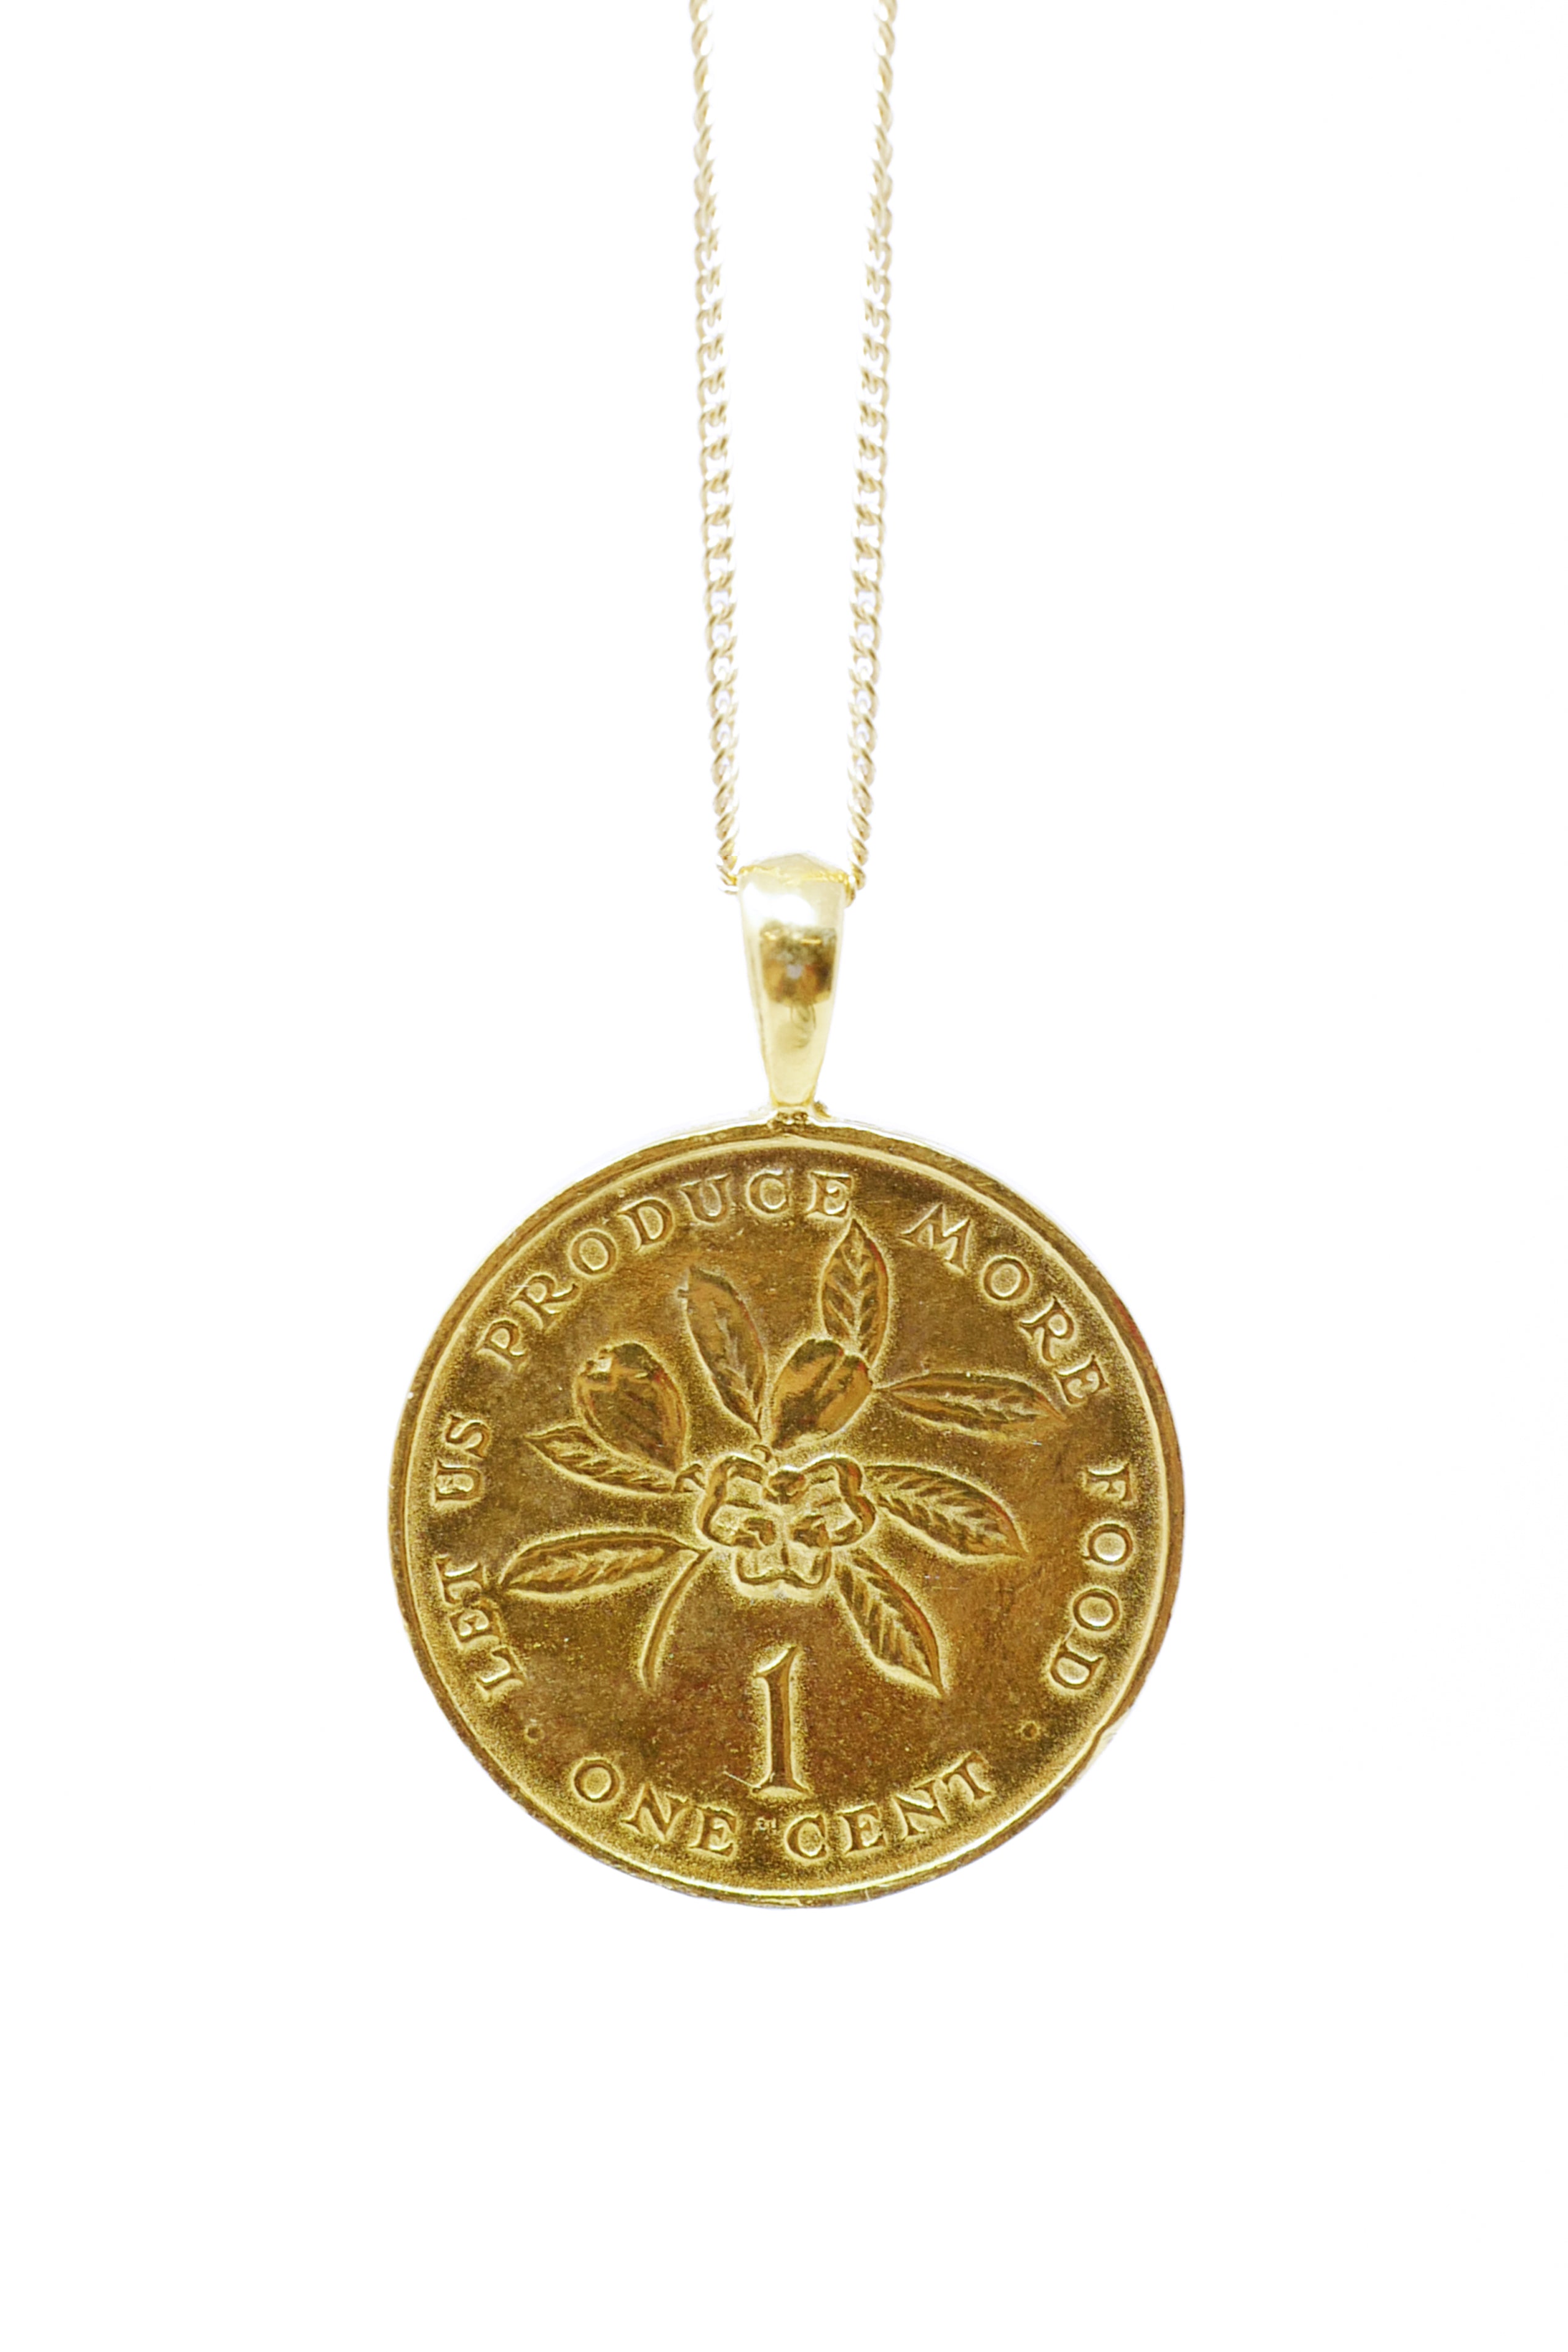 THE JAMAICAN Ackee Coin Necklace – omiwoods